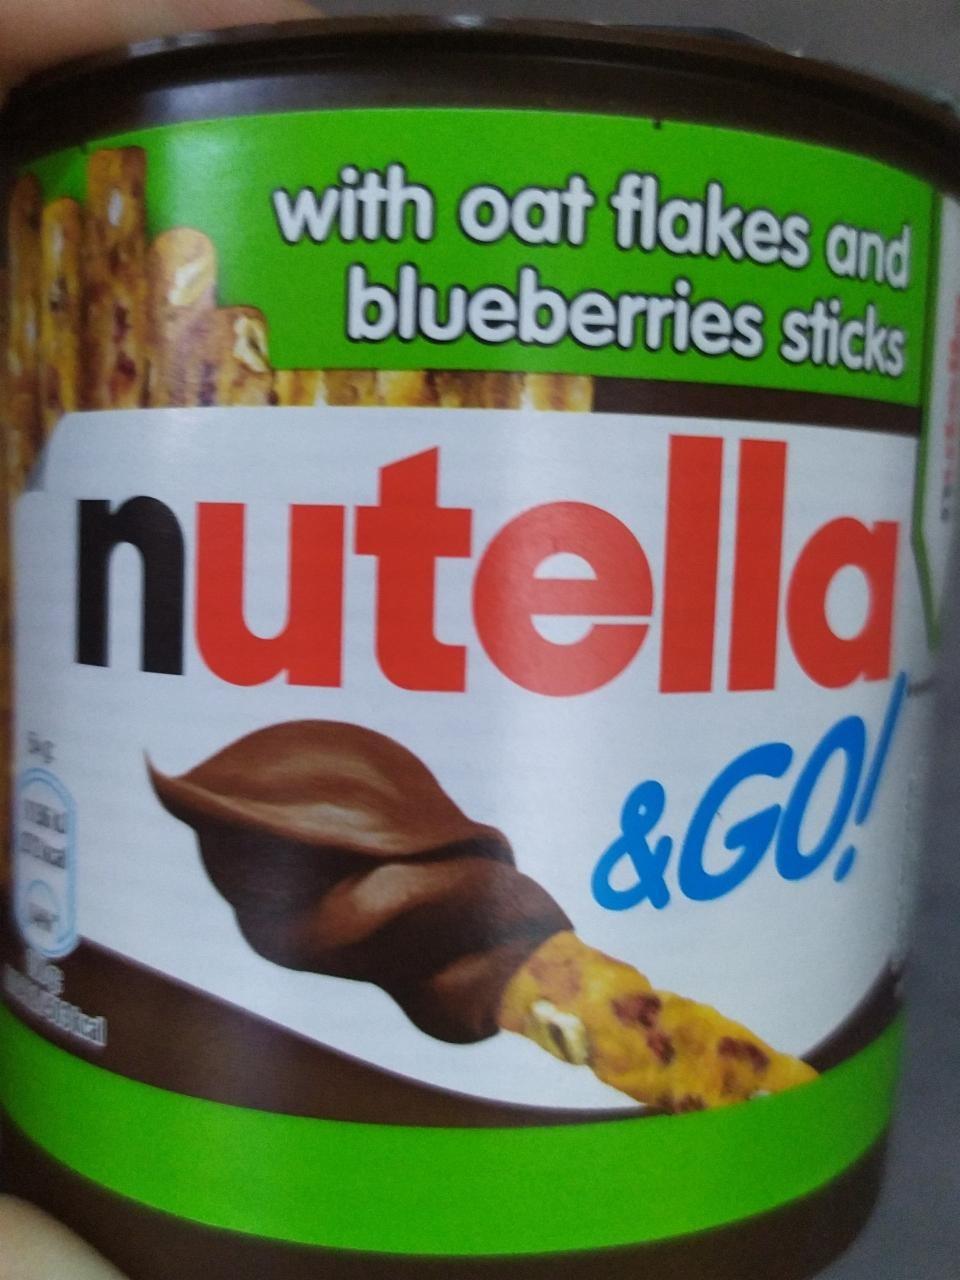 Fotografie - Nutella & go with oat flakes and blueberries stick